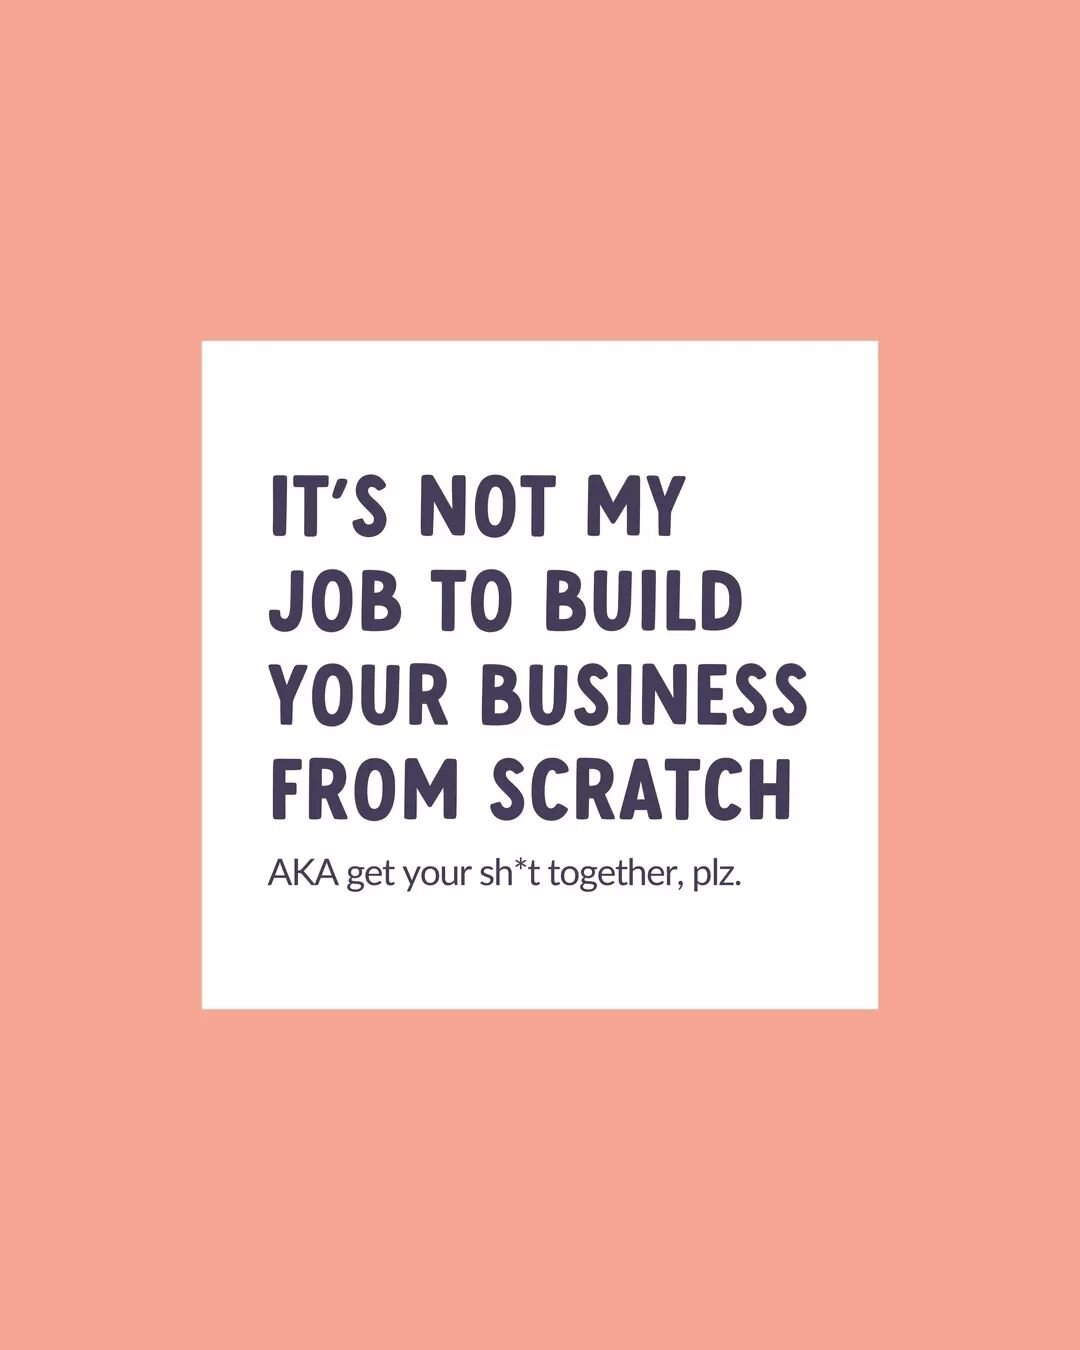 FEISTY ONE, SHE IS&nbsp;🤬

Sorry, but it's true.

If you come to me (or ANY copywriter) expecting me to build a business from scratch for you, it ain't gonna happen.

There are foundational things you HAVE TO KNOW ABOUT YOUR BUSINESS BEFORE ANYONE C